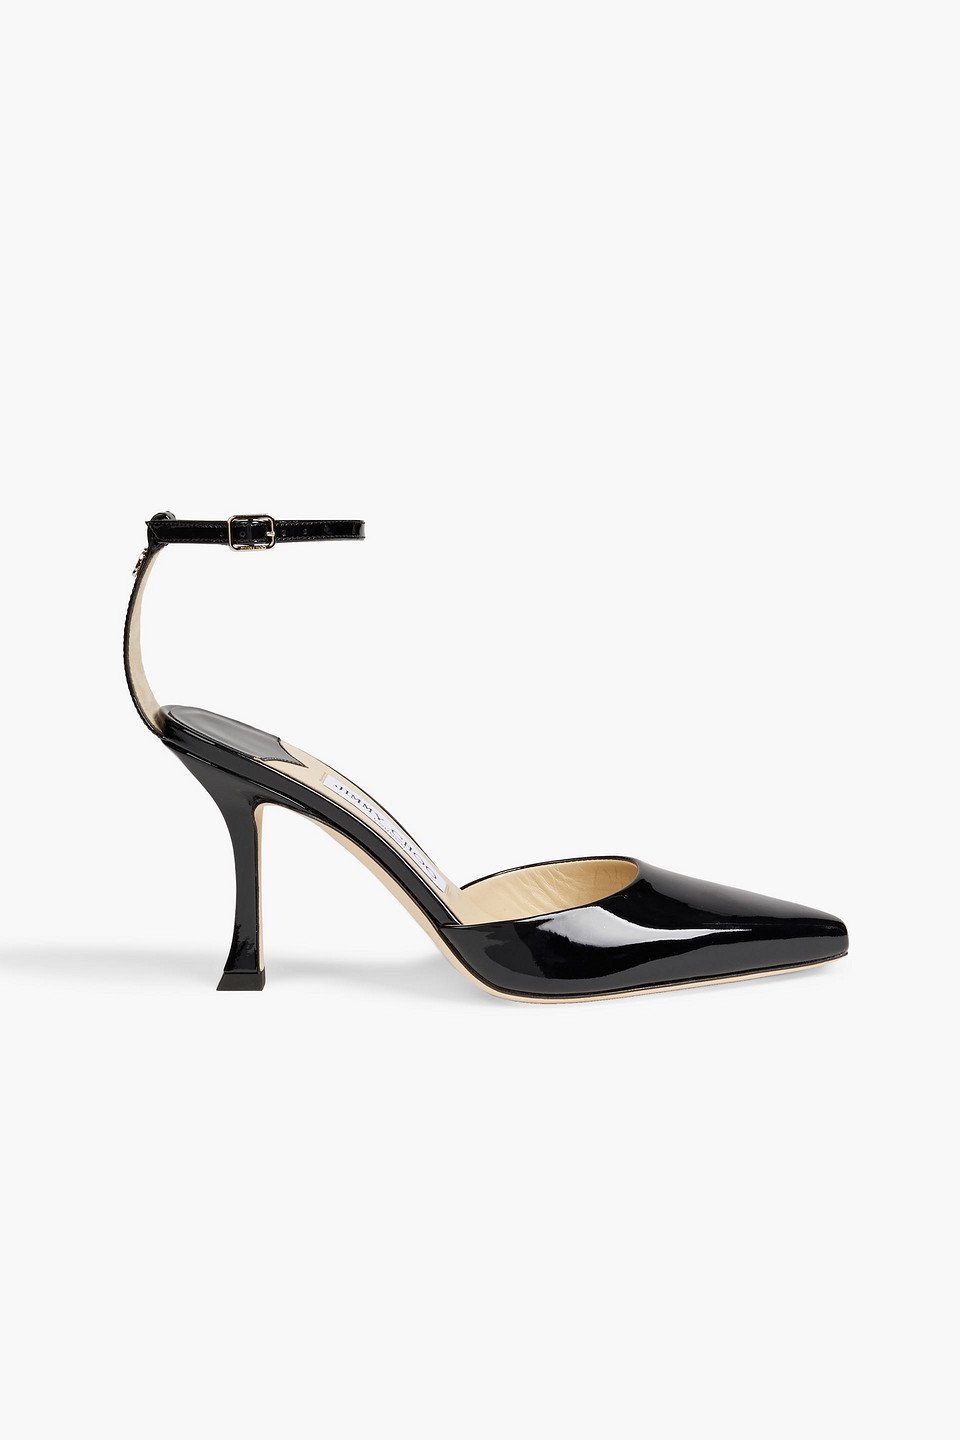 Jimmy Choo Mair Pumps in Black Patent Leather — UFO No More